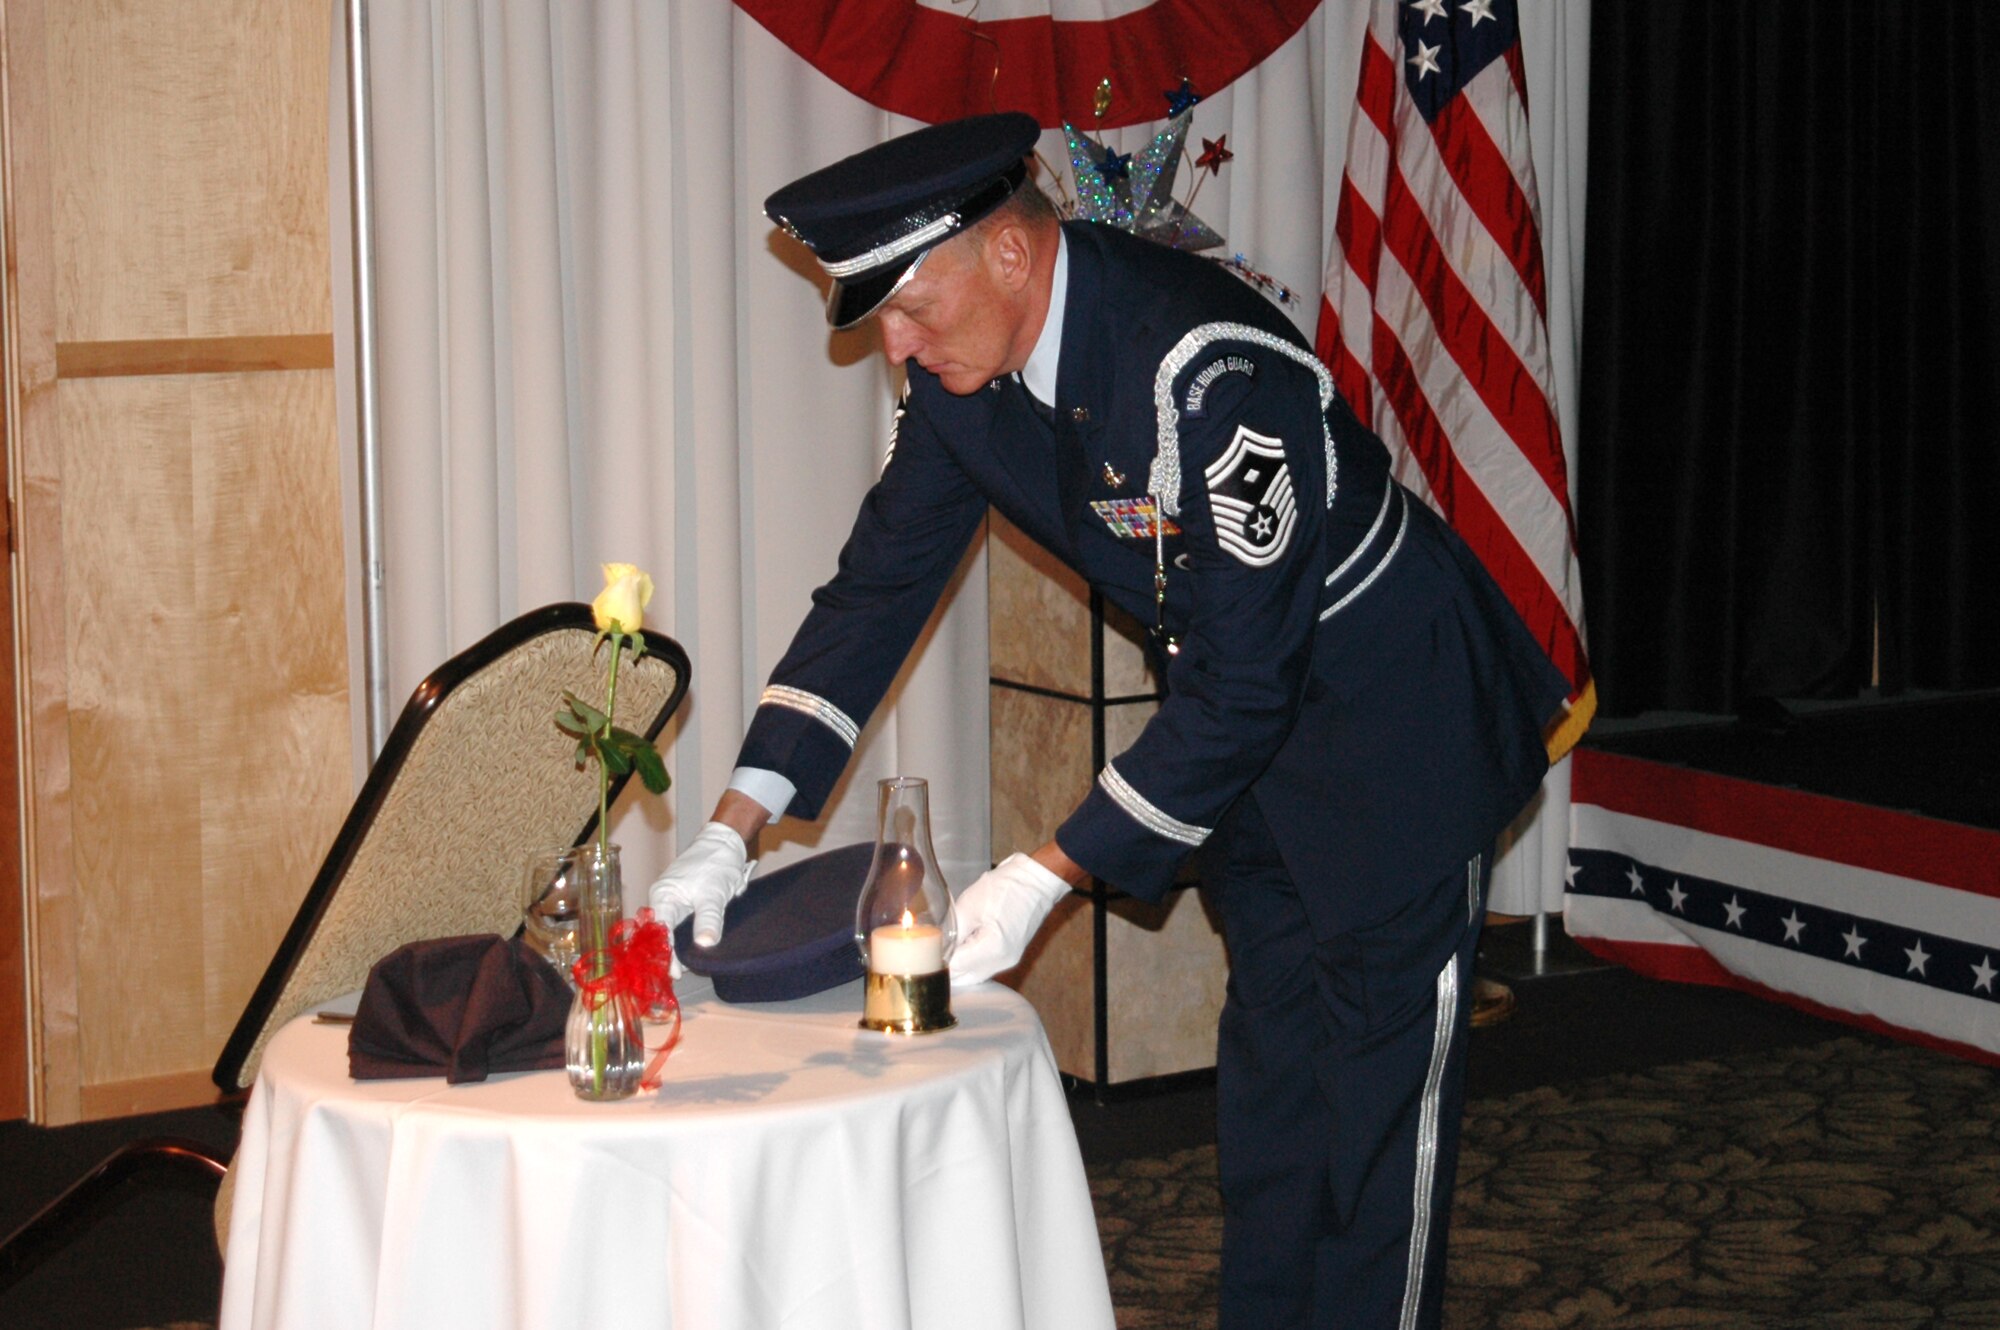 Senior Master Sgt. Joe Shern places a hat on the POW/MIA table at the 169th Intelligence Squadron's dining out in 2005.  The table symbolizes the unit's commitment to never forget those who were taken prisoner, or who have never returned from armed conflict.  Sgt. Shern is a member of the Utah Air National Guard's Base Honor Guard.
U.S. Air Force photo by:  Master Sgt. Burke Baker